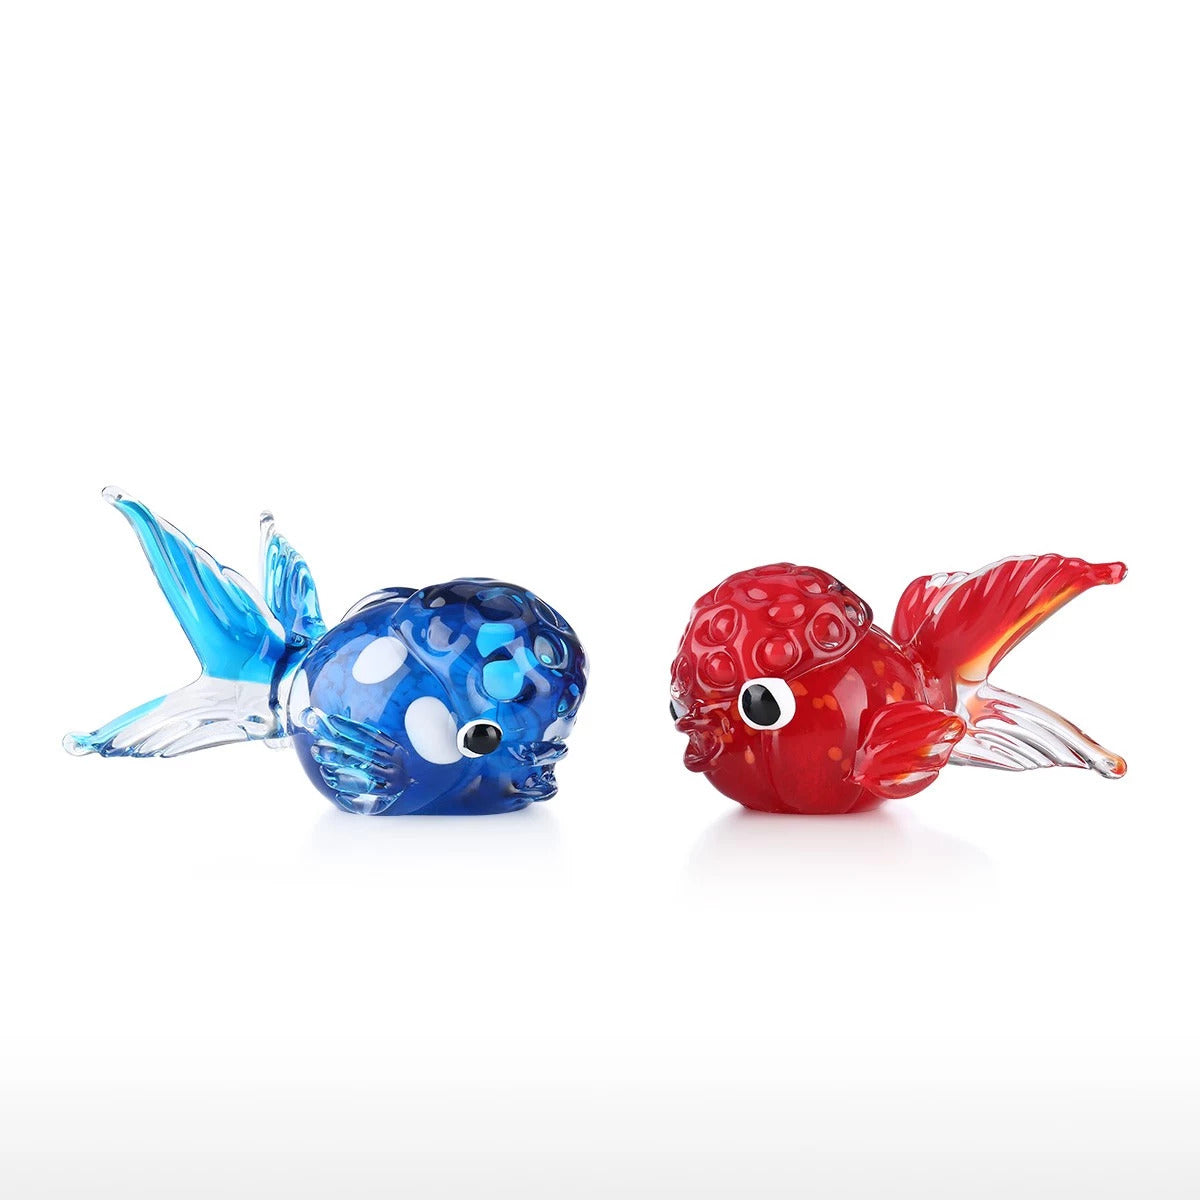 Red and Blue Lionfish with Blown Glass Fish Sculpture